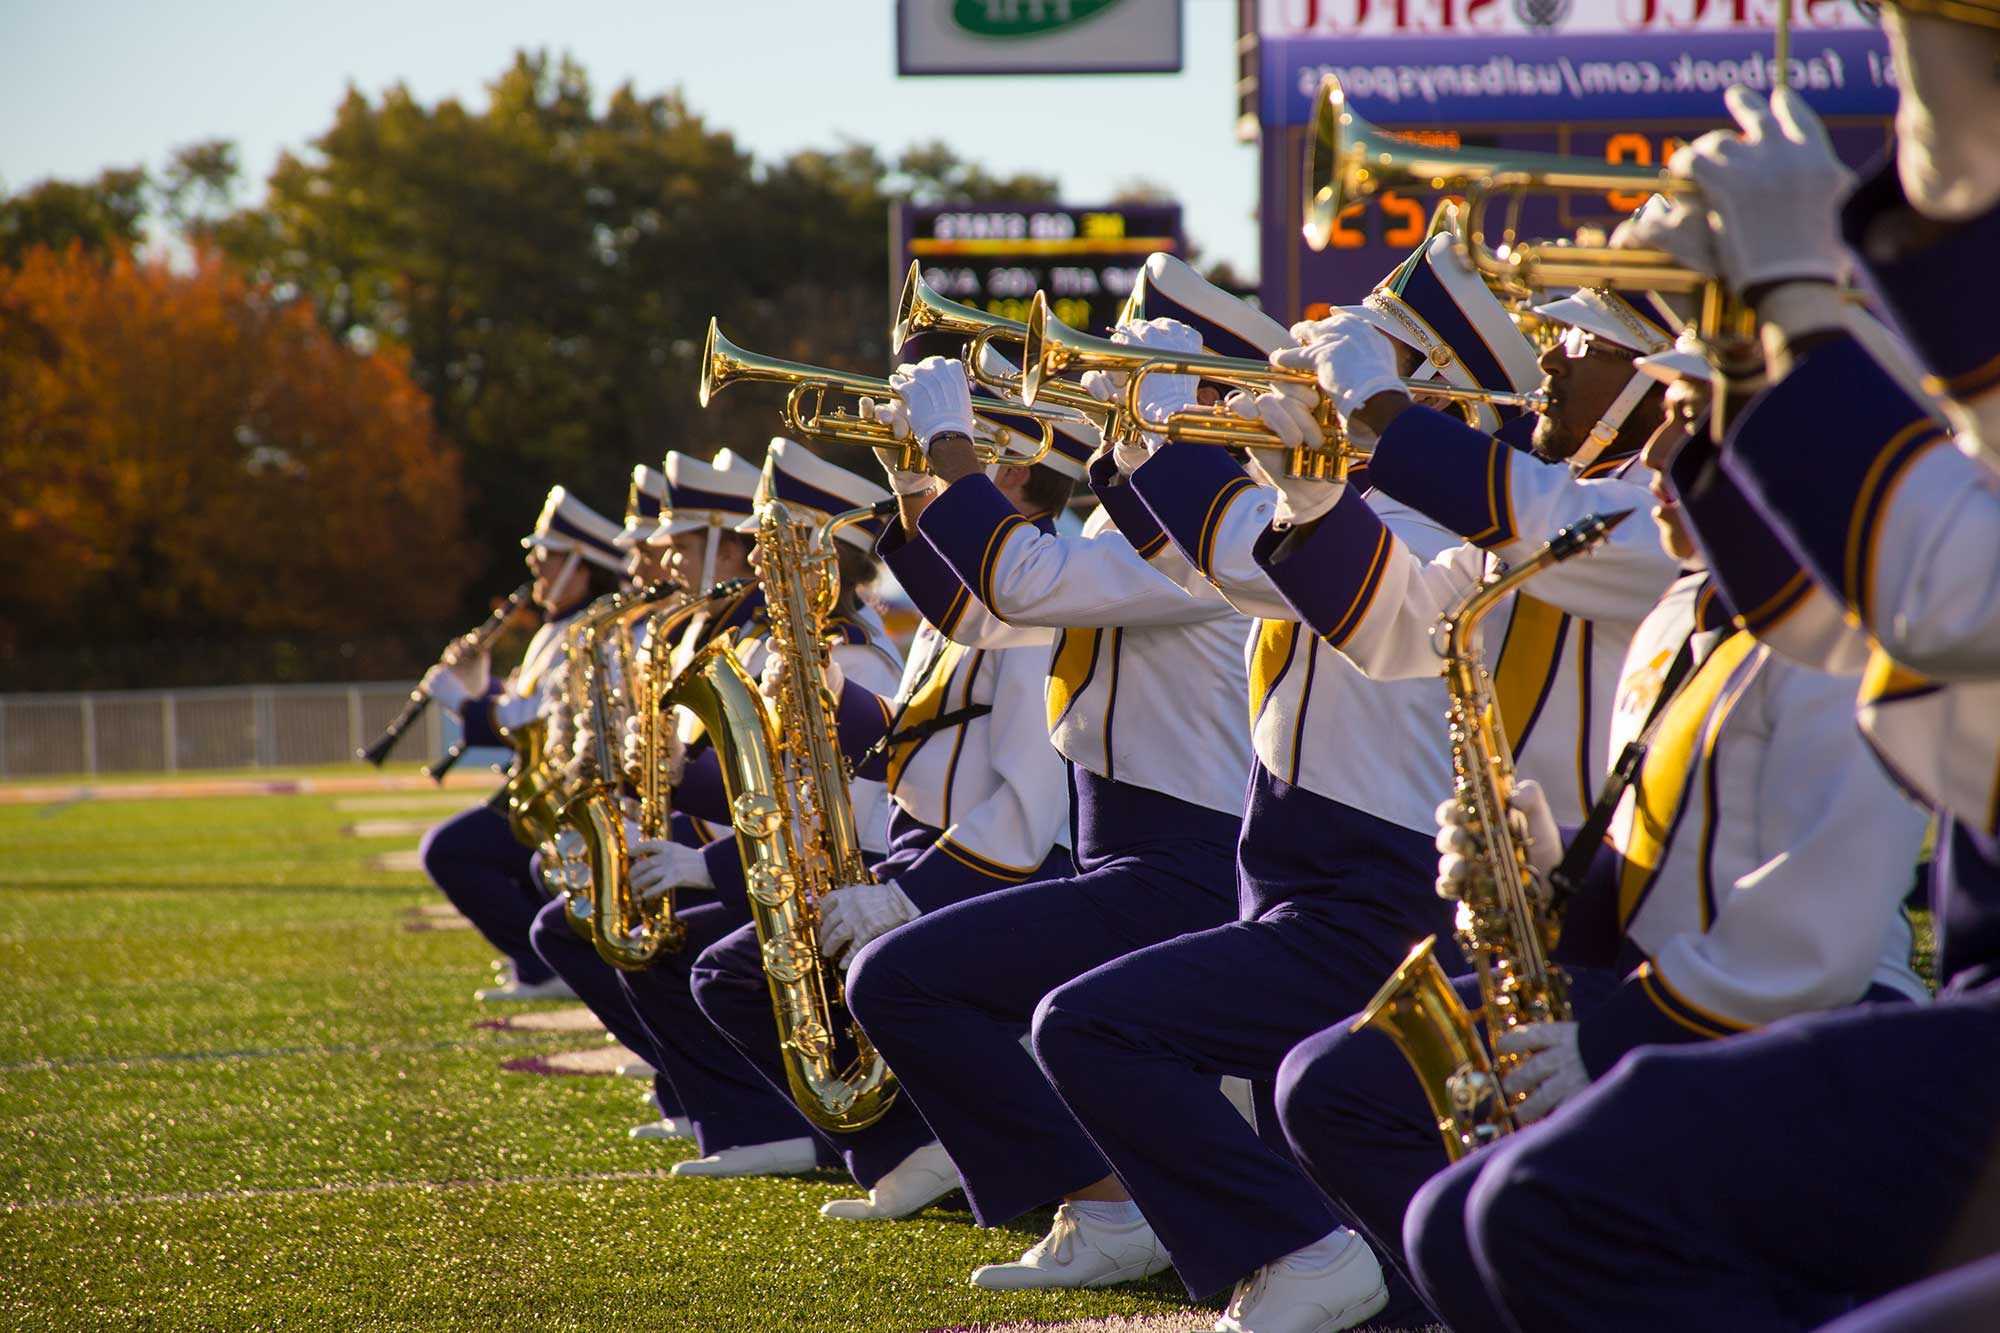 The UAlbany Marching Band's brass section kneels while playing on a green field under a blue sky.